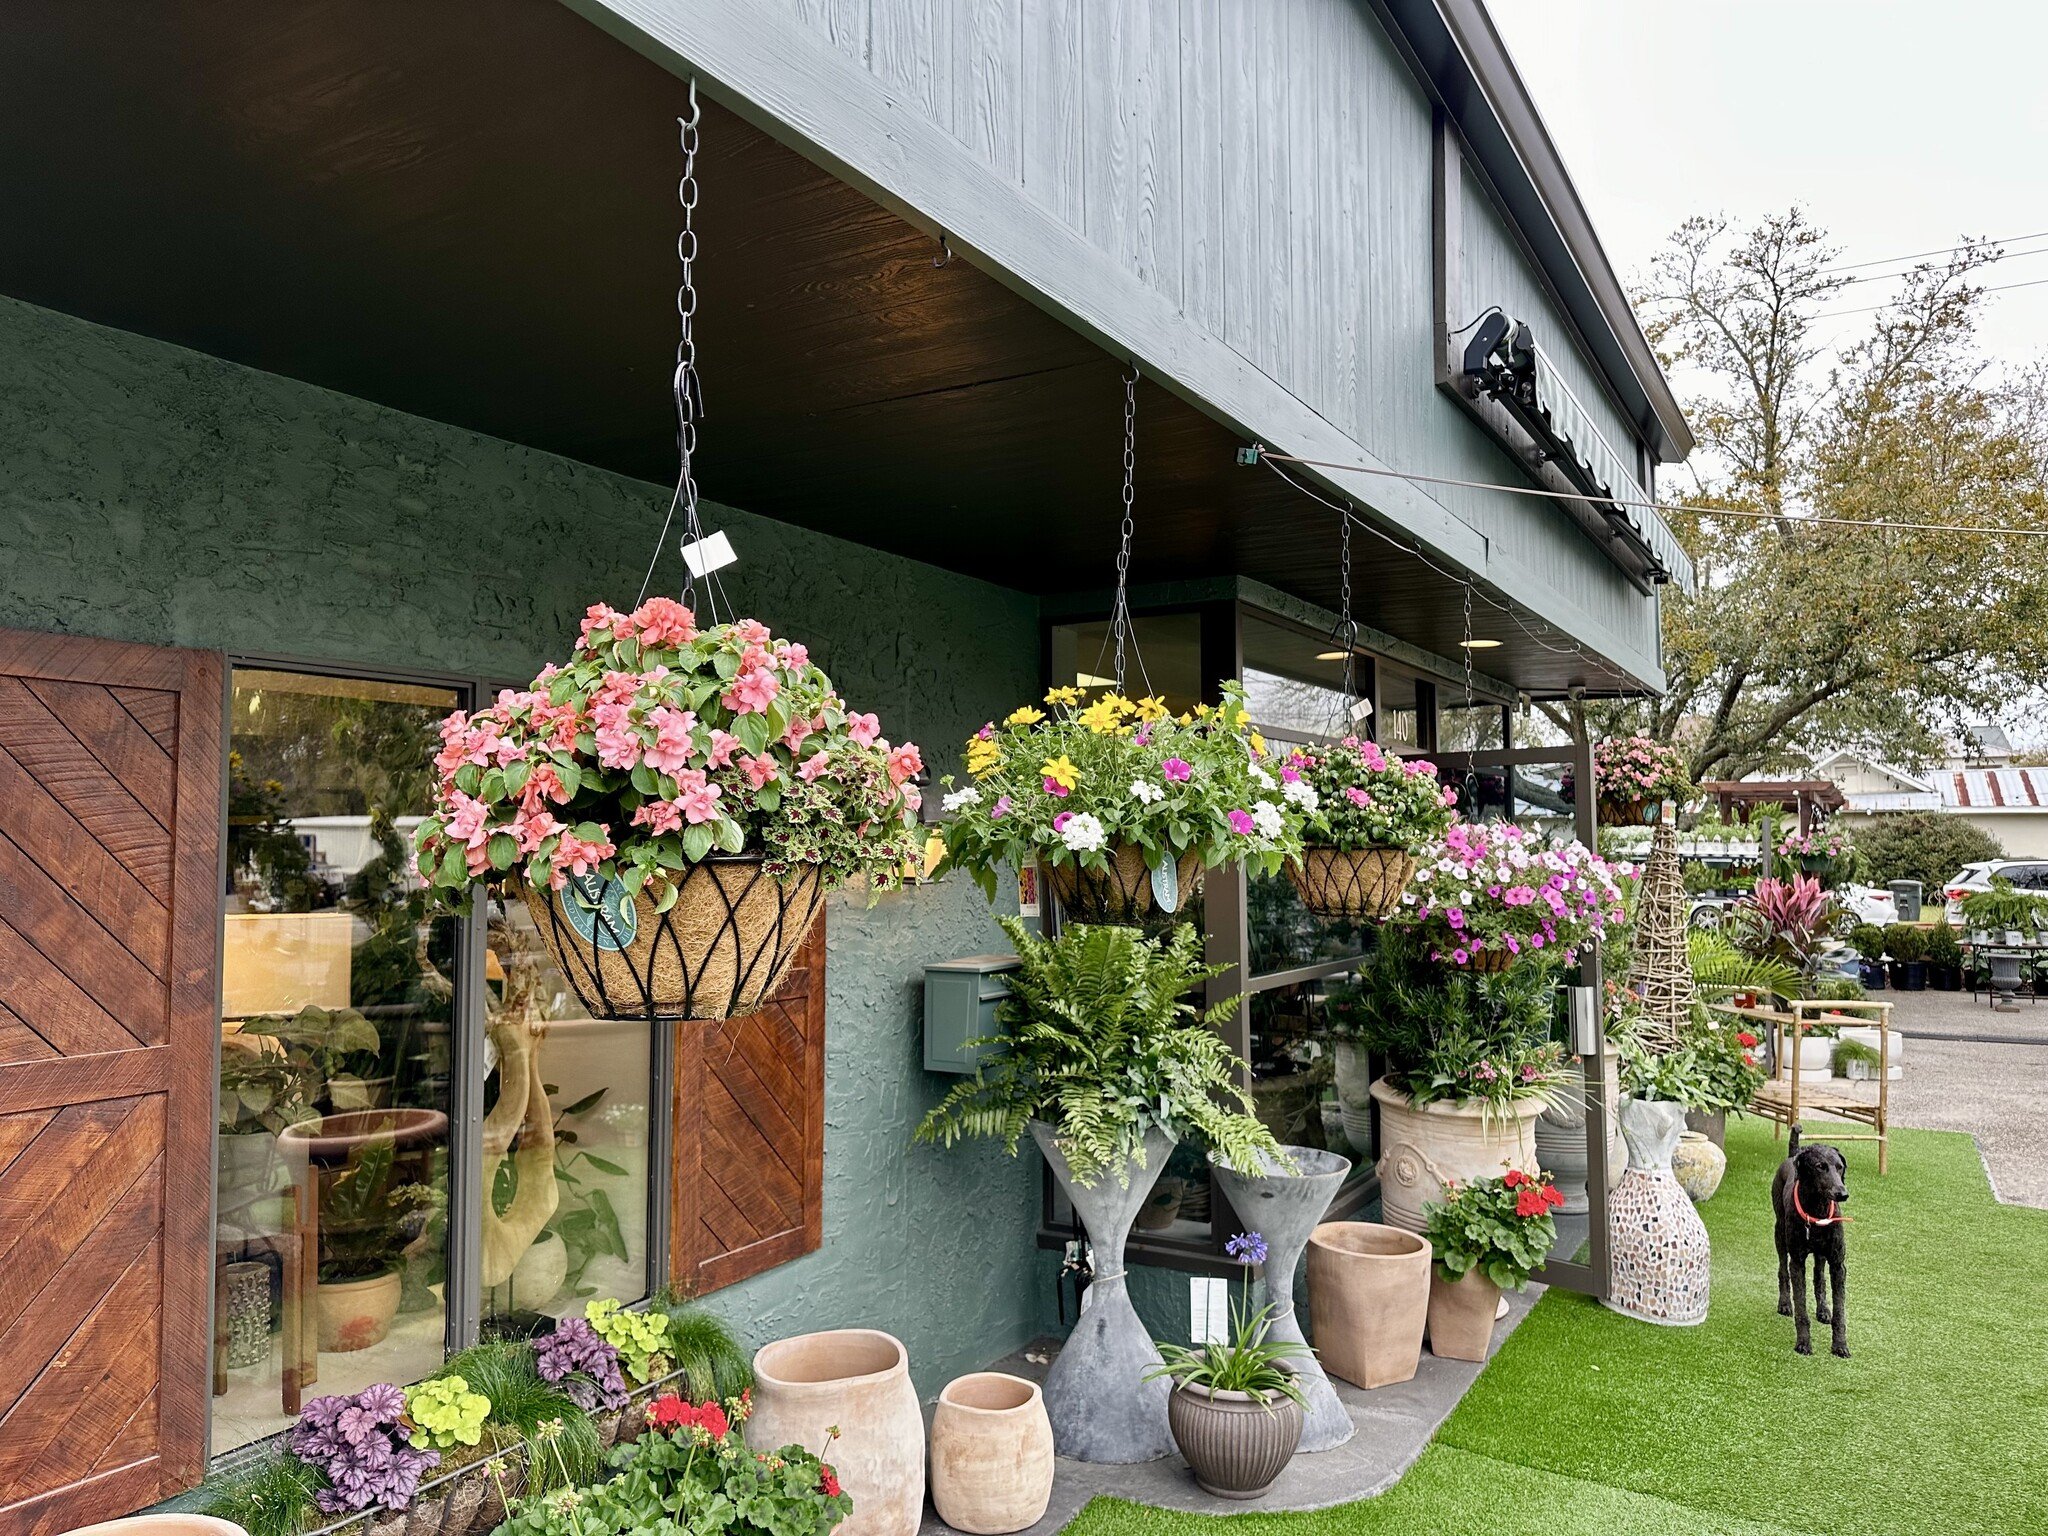 The Plant Shoppe Springs into Action with March 1 Opening